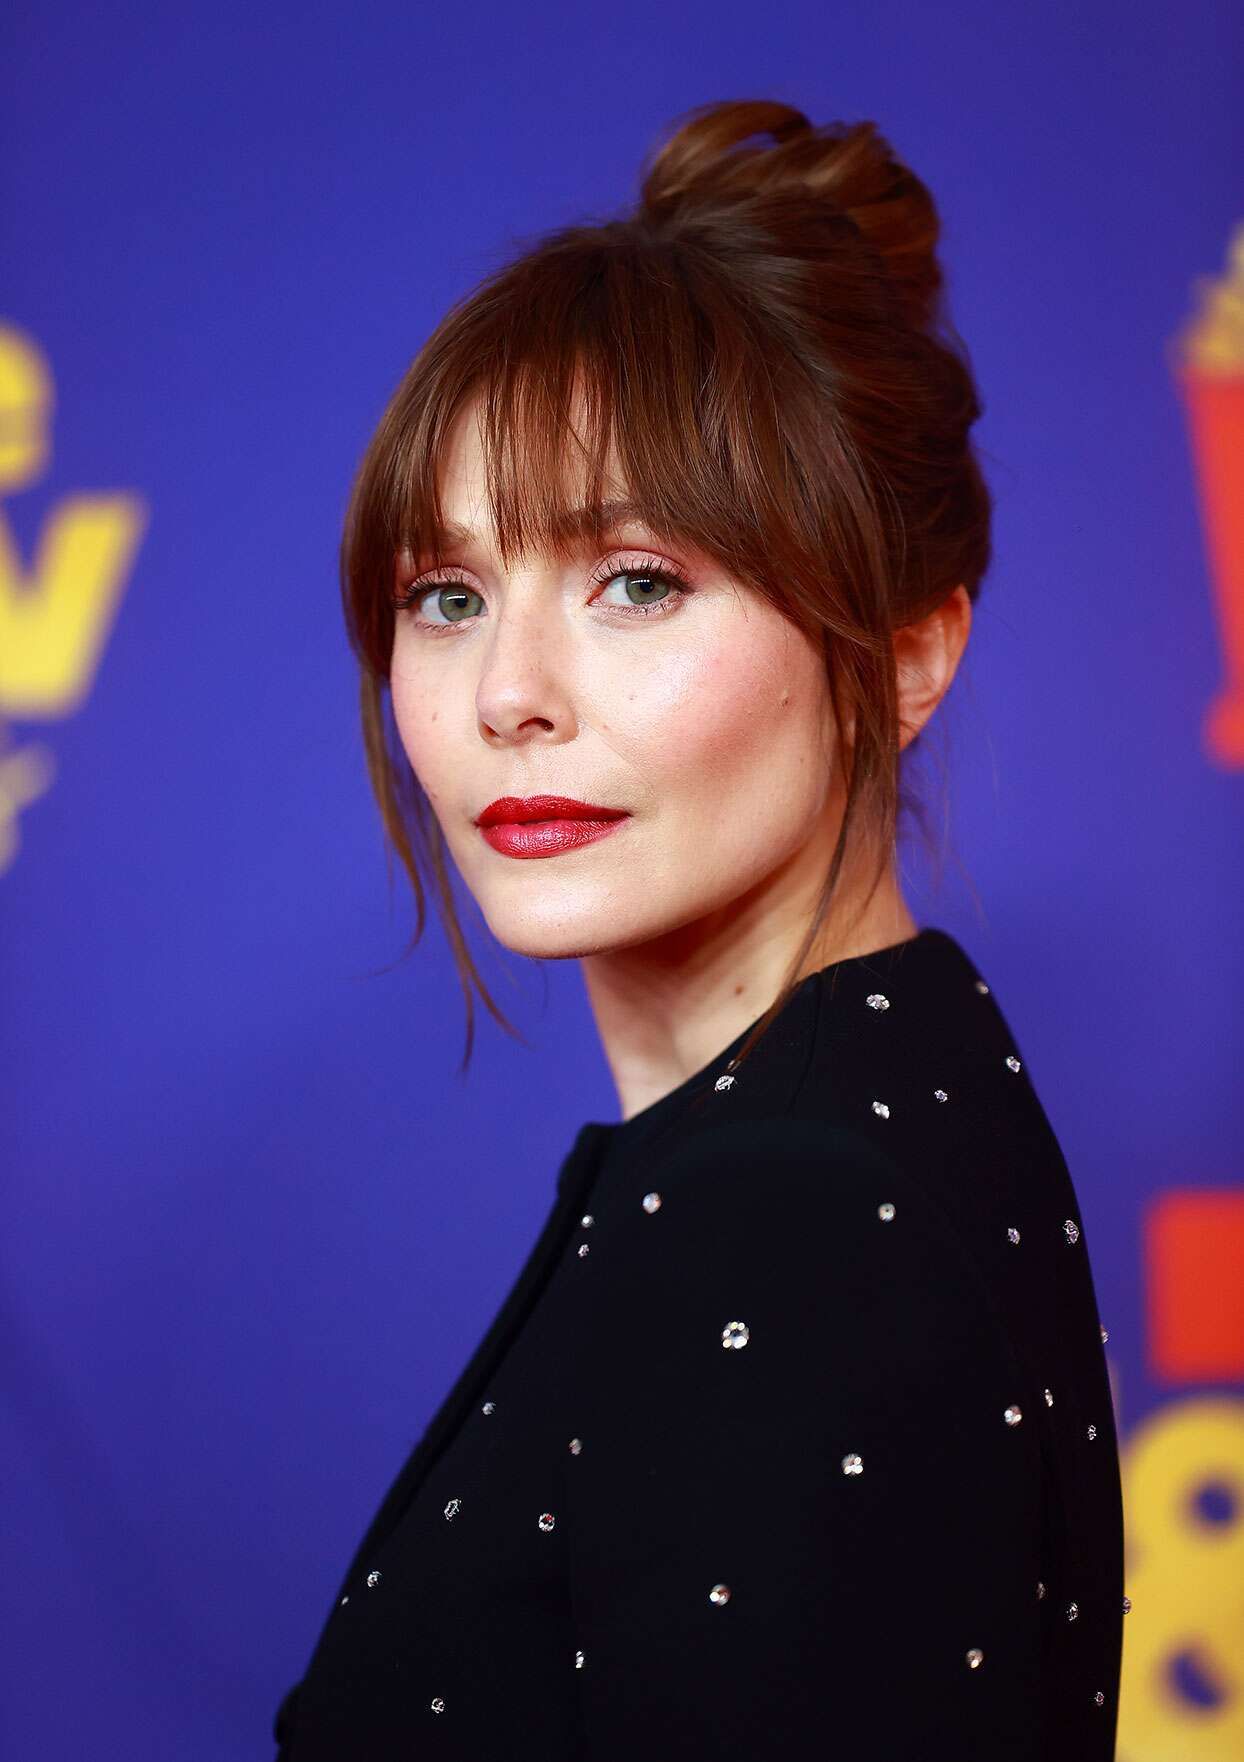 These Low-Maintenance Bangs Will Convince You to Get Your Own This Summer